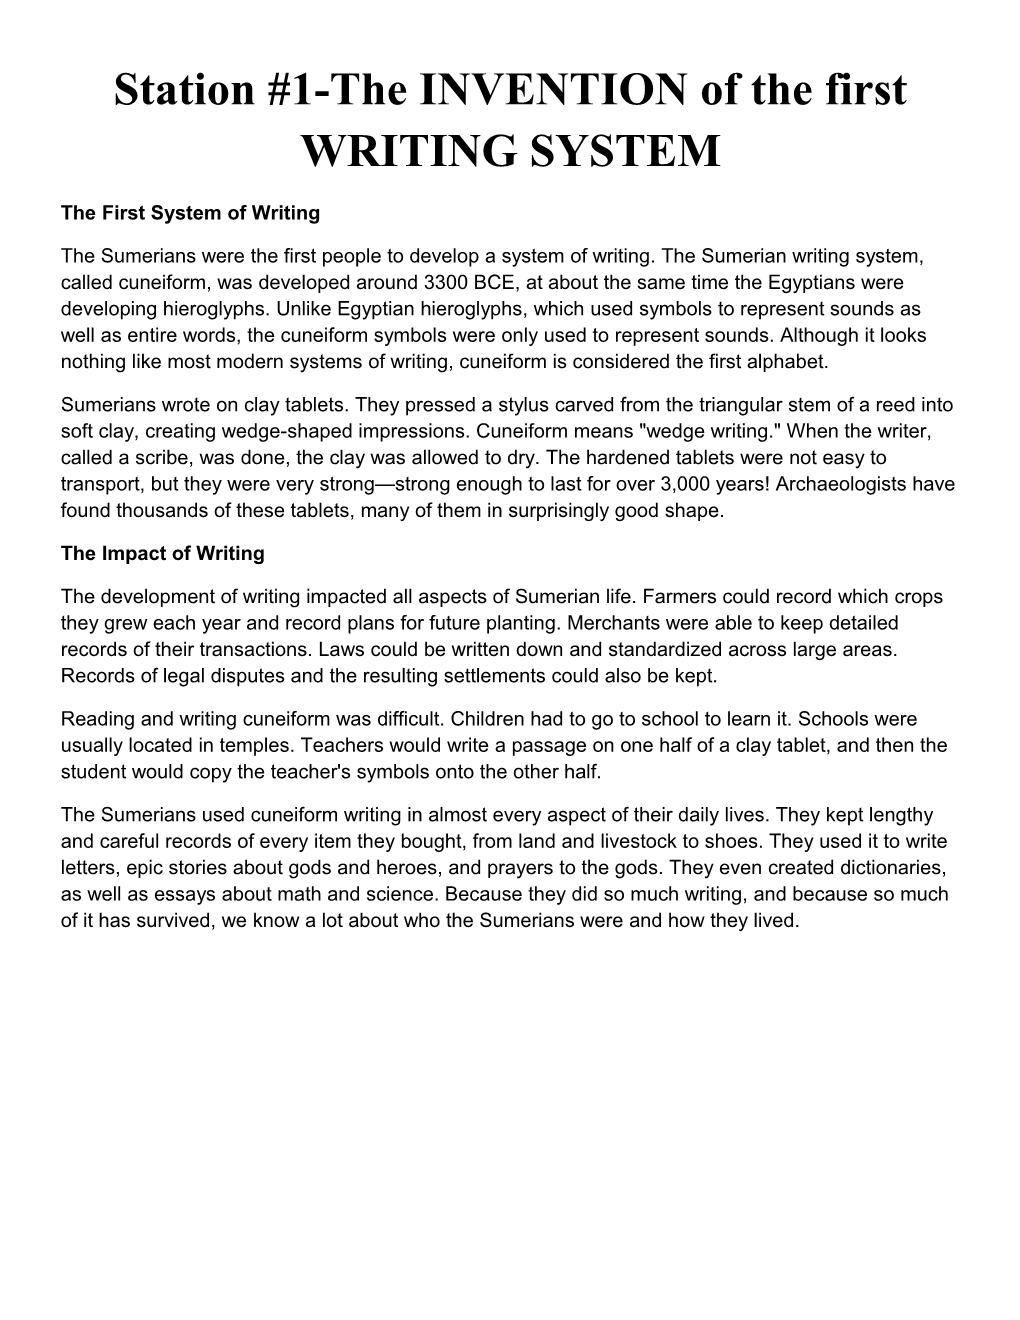 Station #1-The INVENTION of the First WRITING SYSTEM